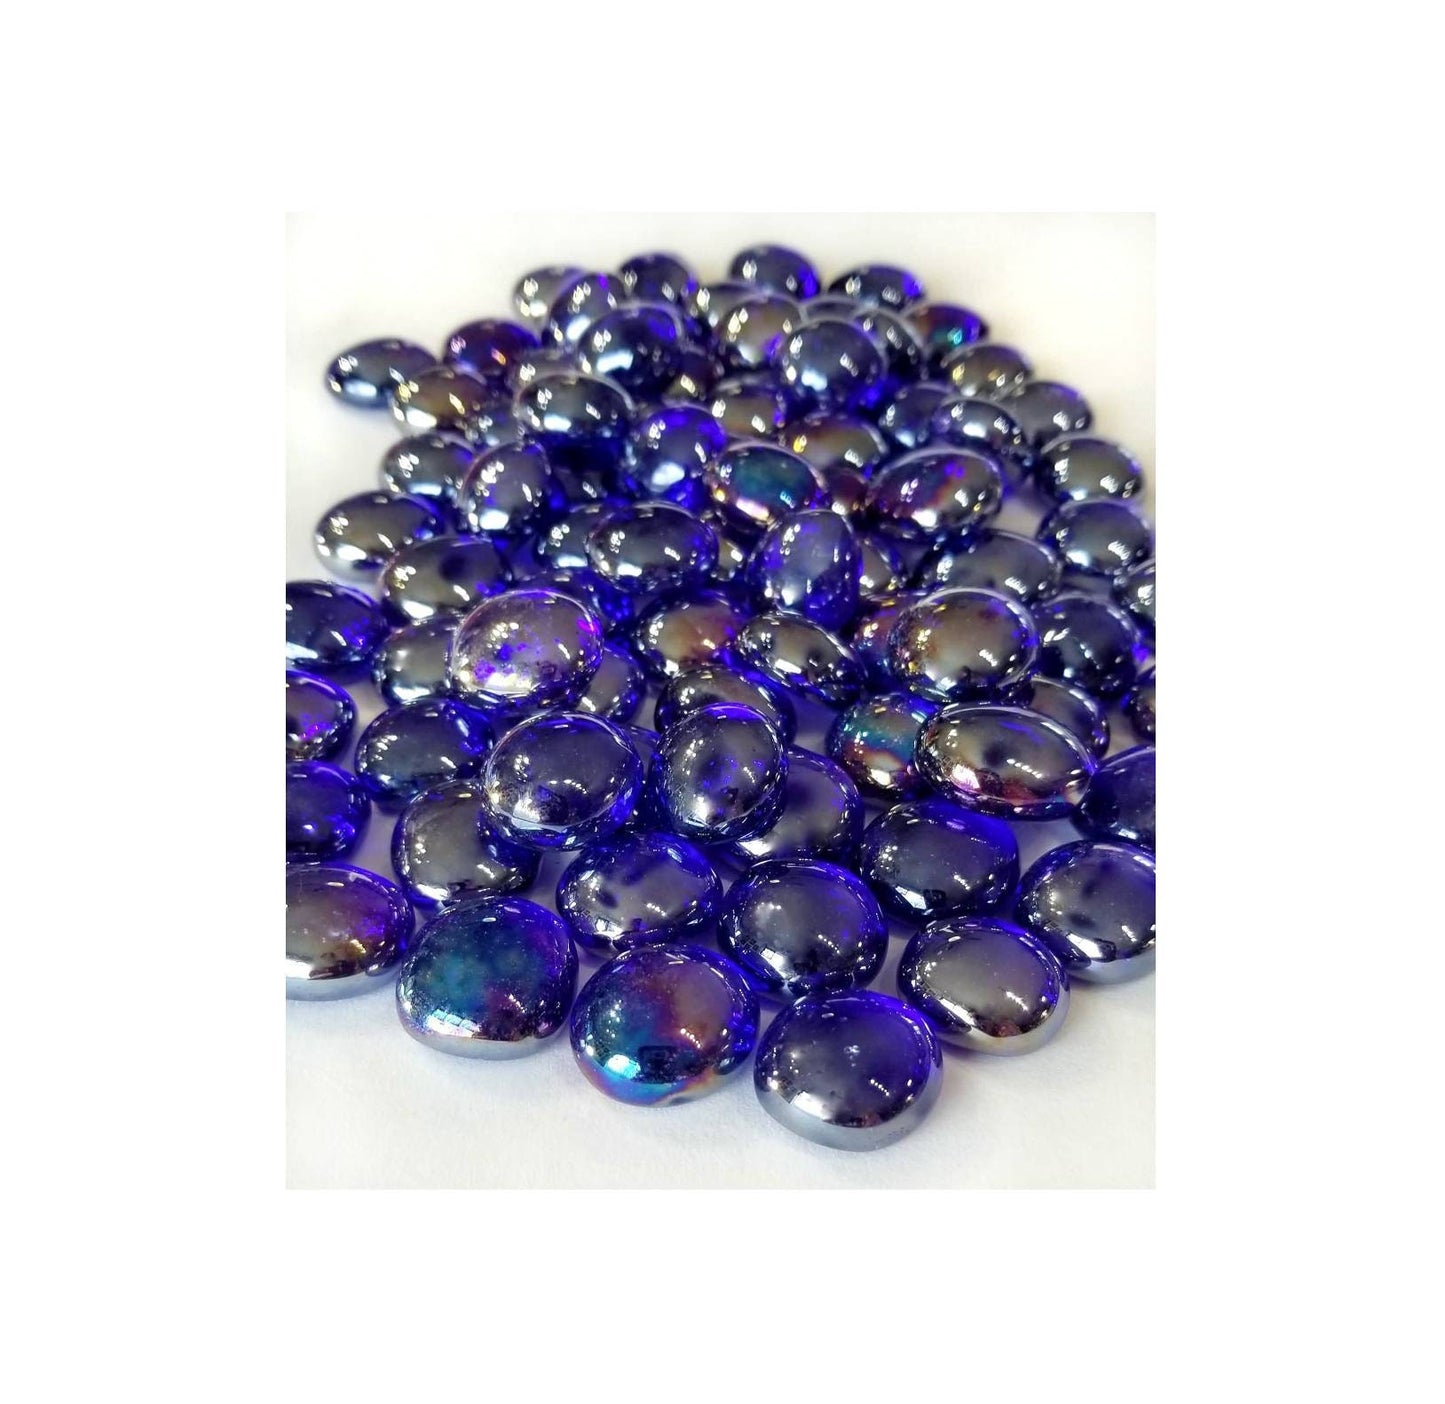 Glass Gems for Stained Glass, Jewelry Making Supply, Kids Teen Craft Project. Flat Marbles, as pictured. Iridescent Cobalt Blue, medium size